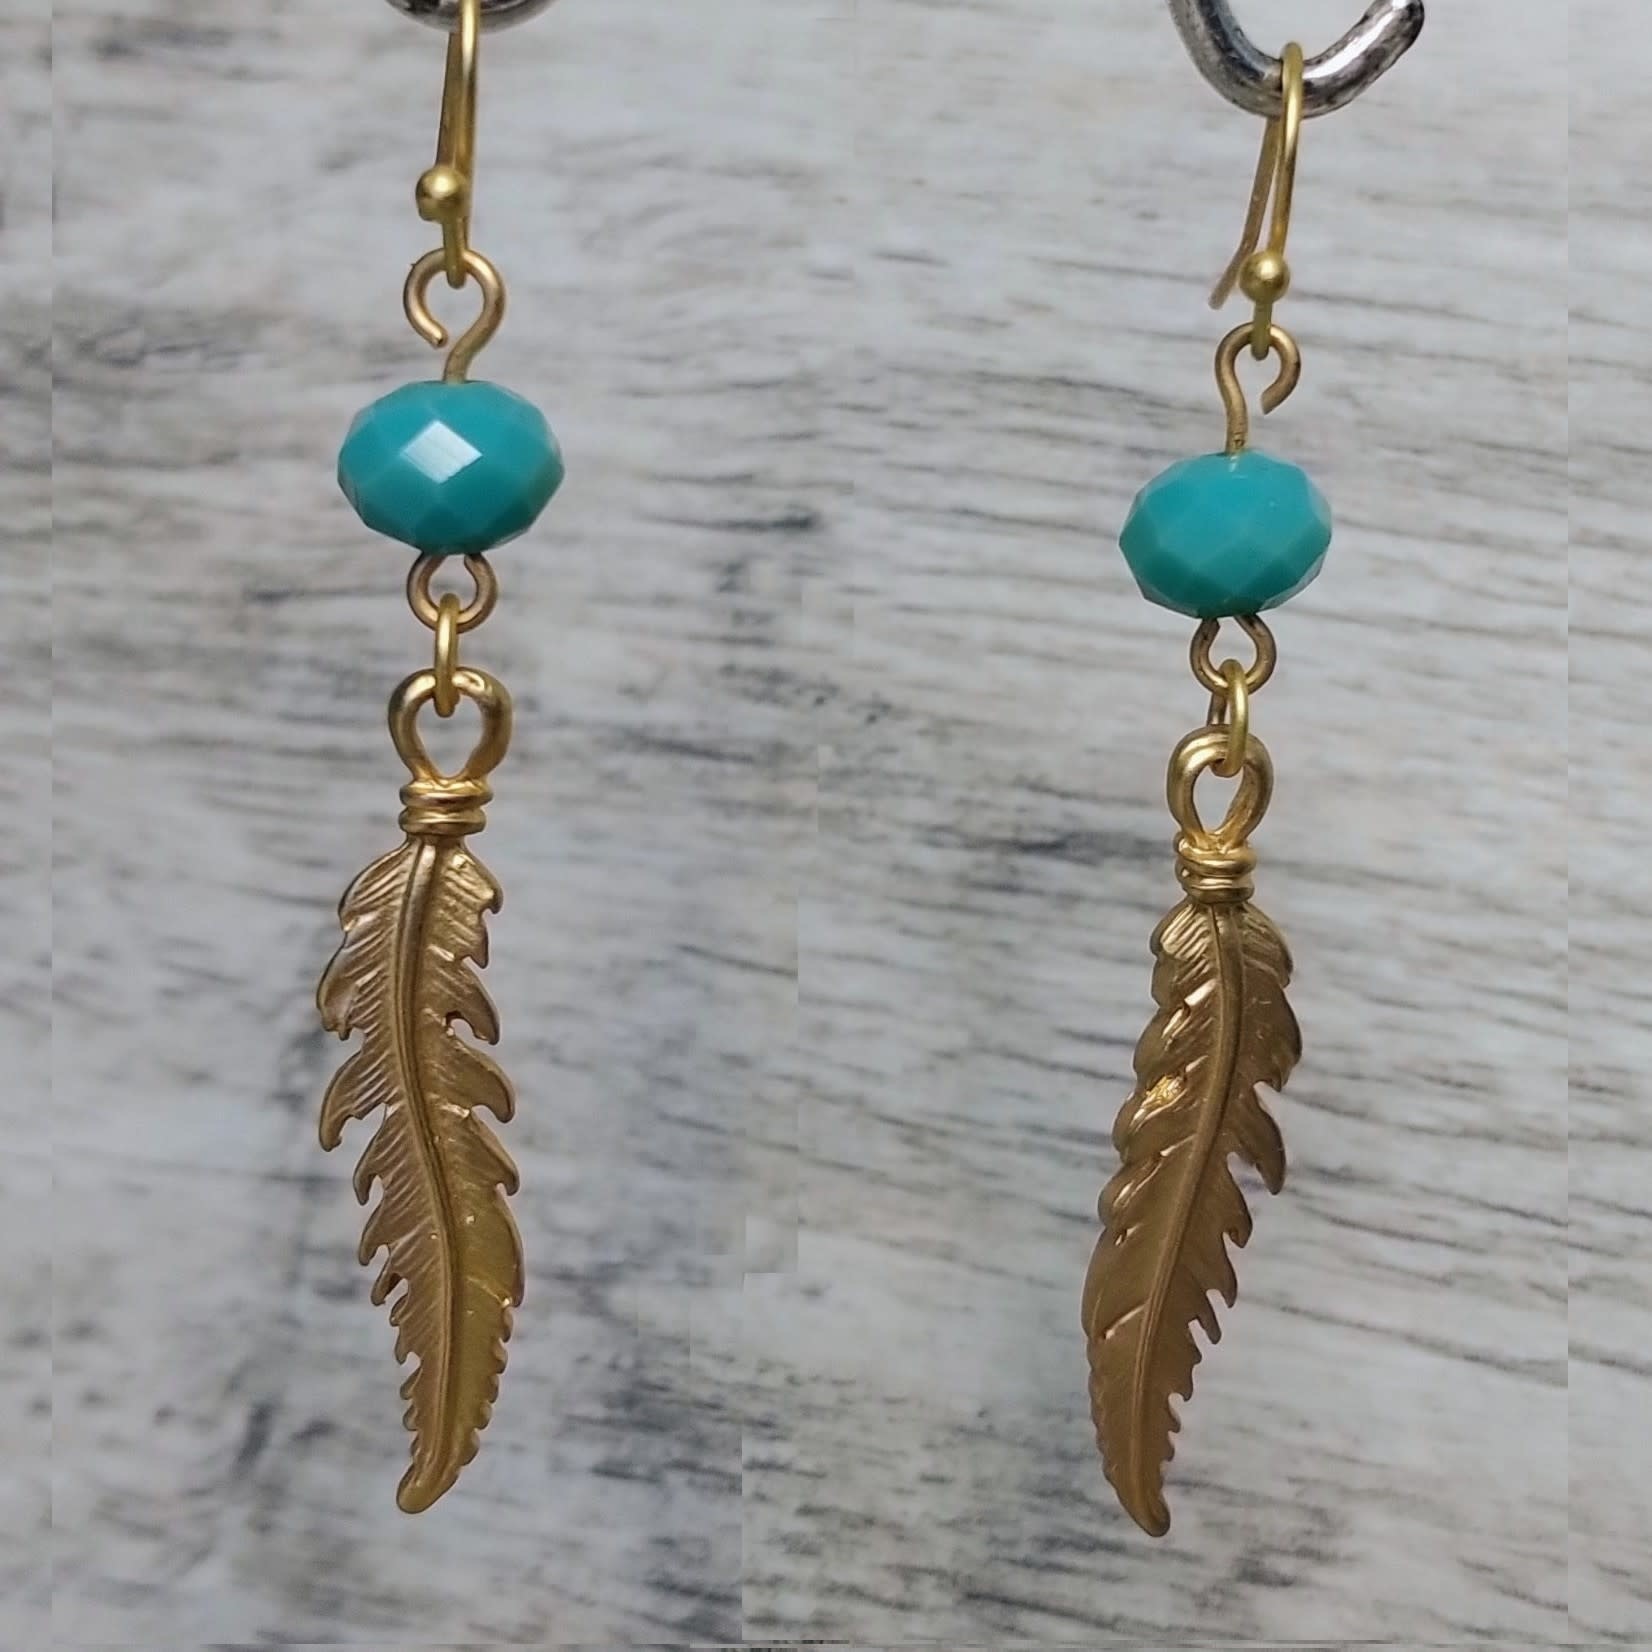 Bead Inspirations Plumage Gold/Turquoise Earring Kit